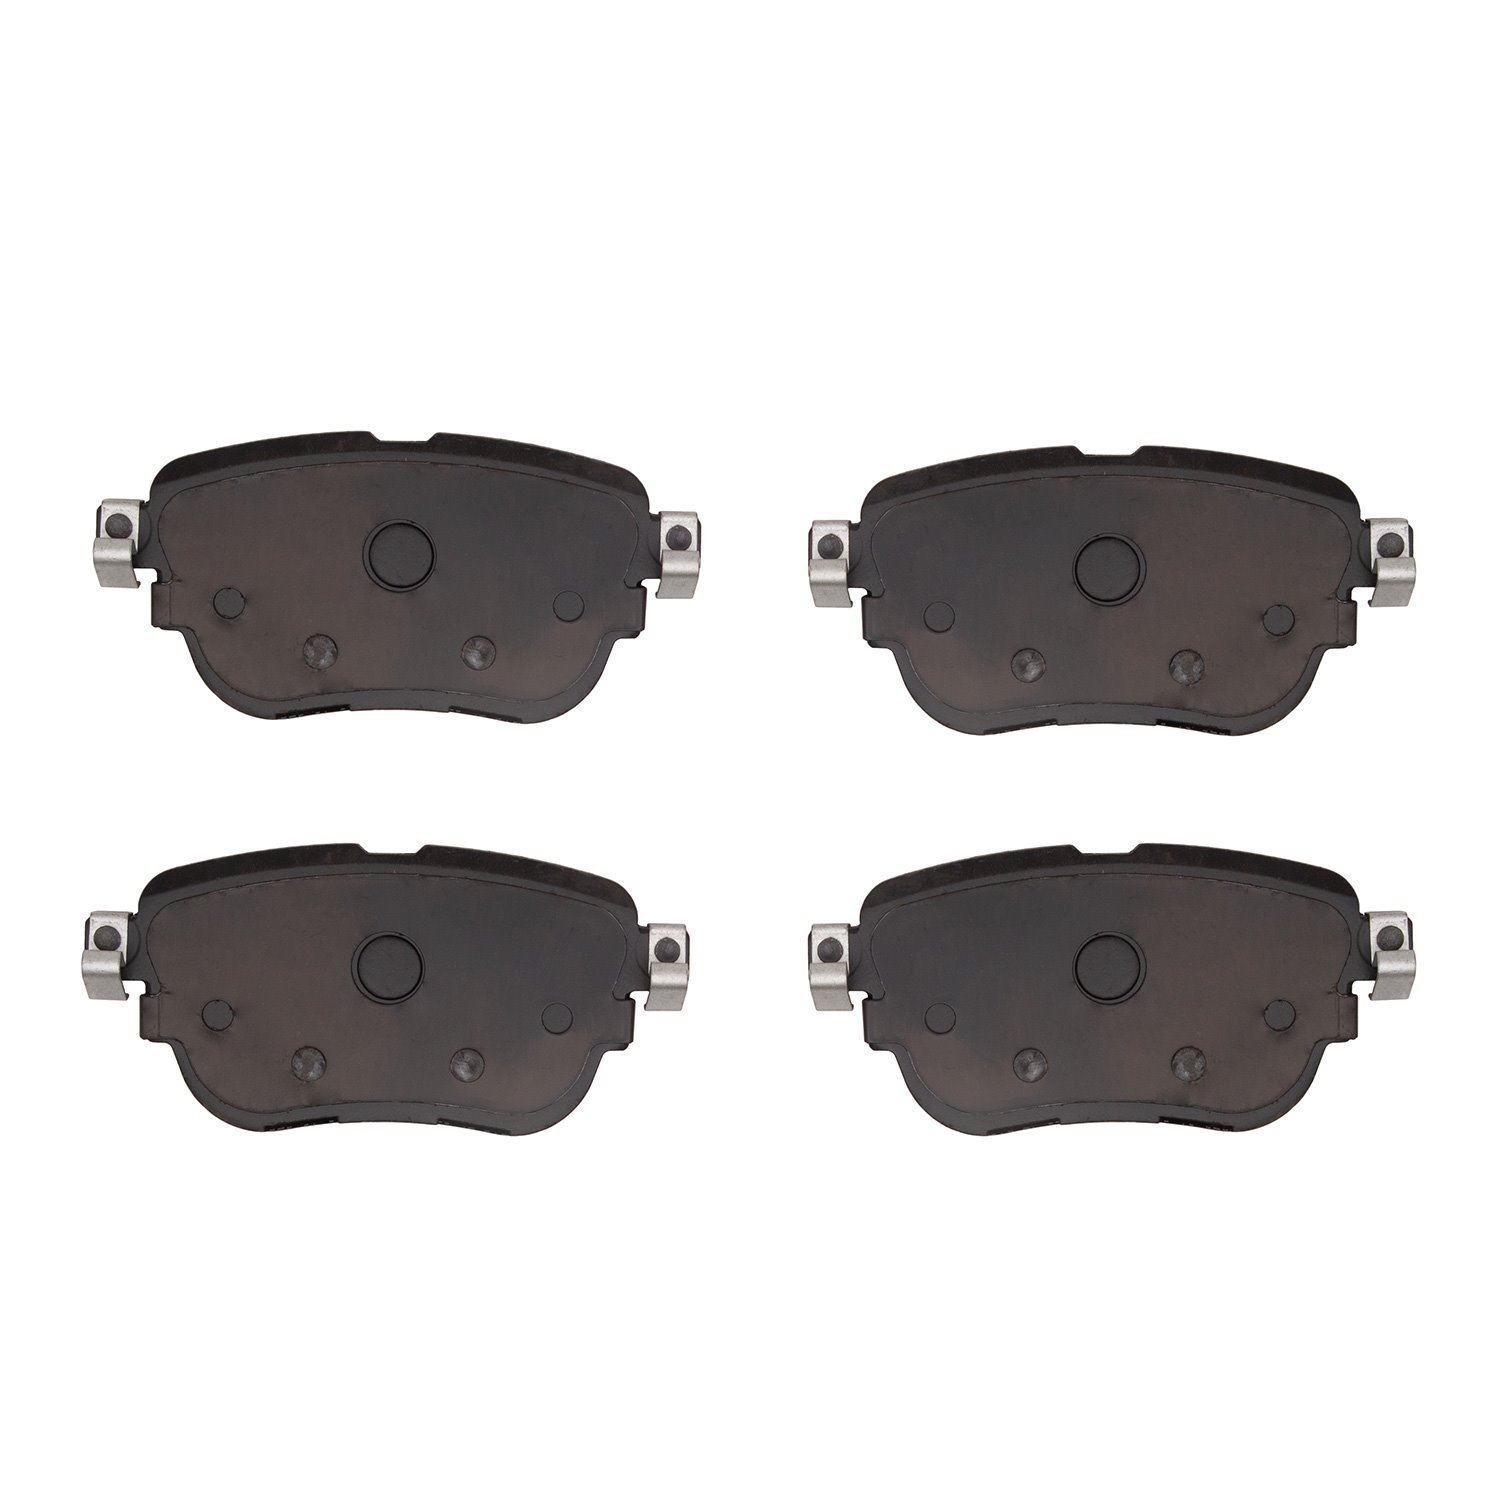 1310-2163-00 3000-Series Ceramic Brake Pads, Fits Select Mercedes-Benz, Position: Rear